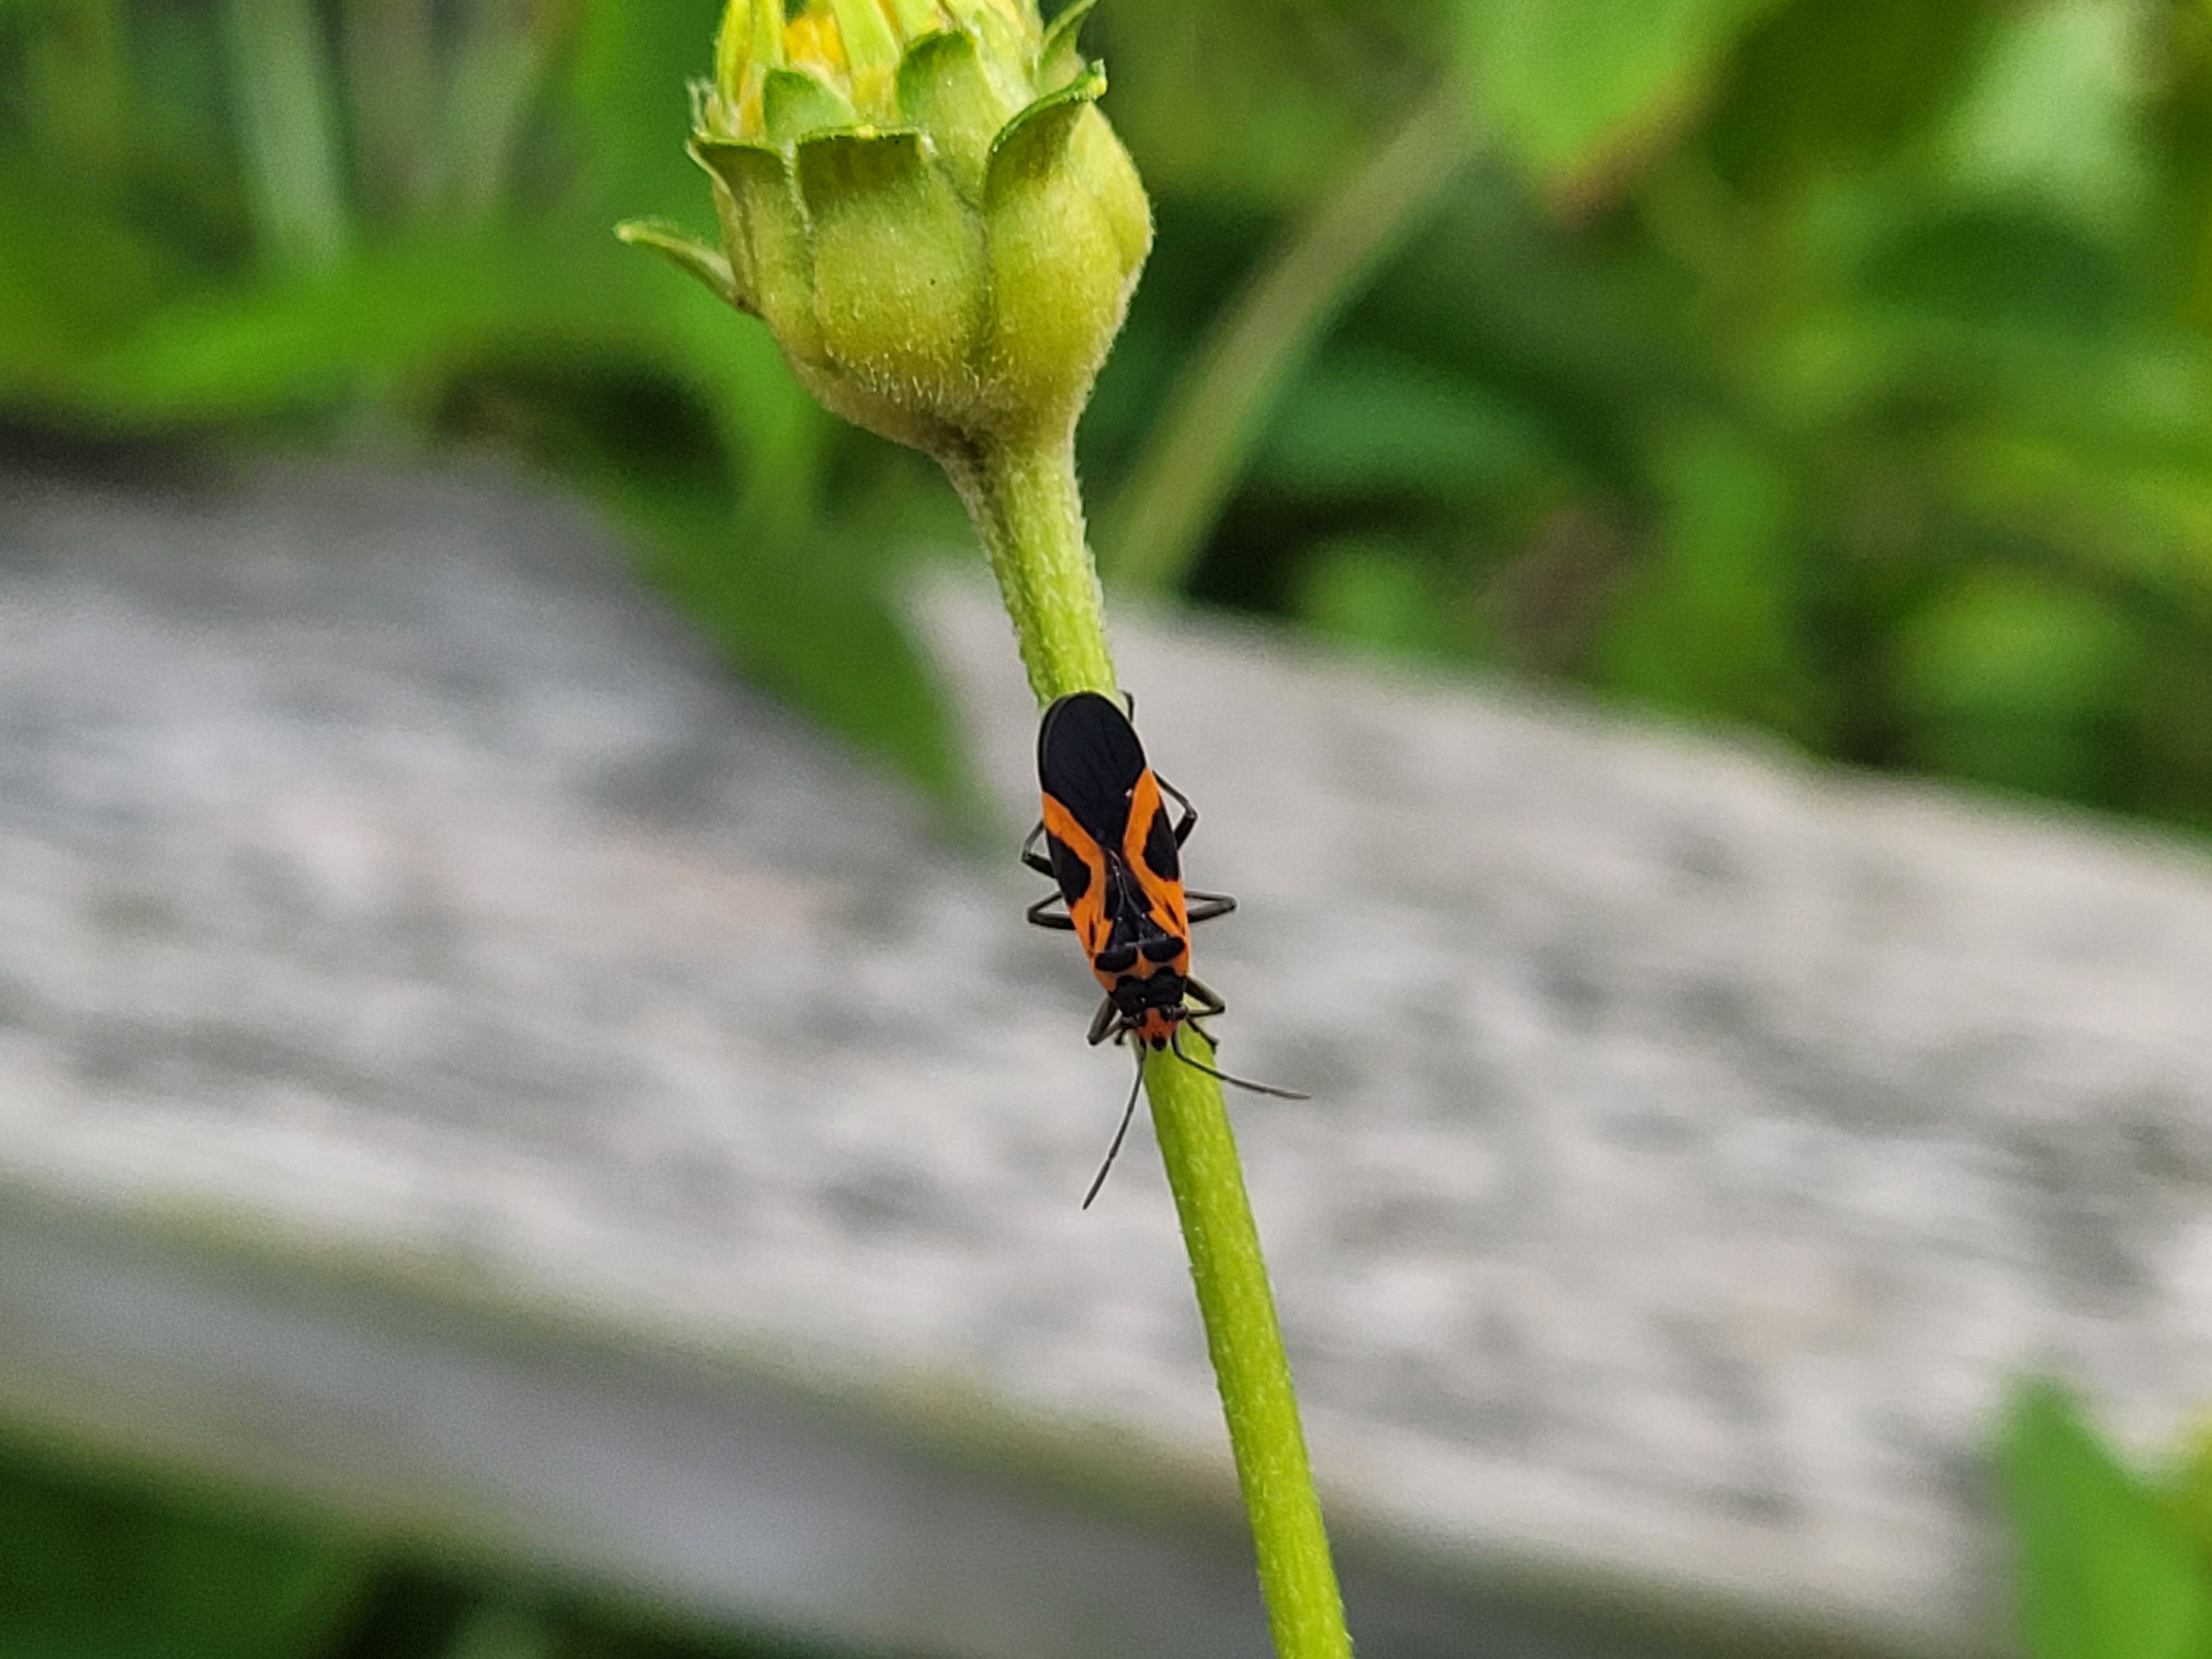 A red and black bug is climbing down a plant stem.